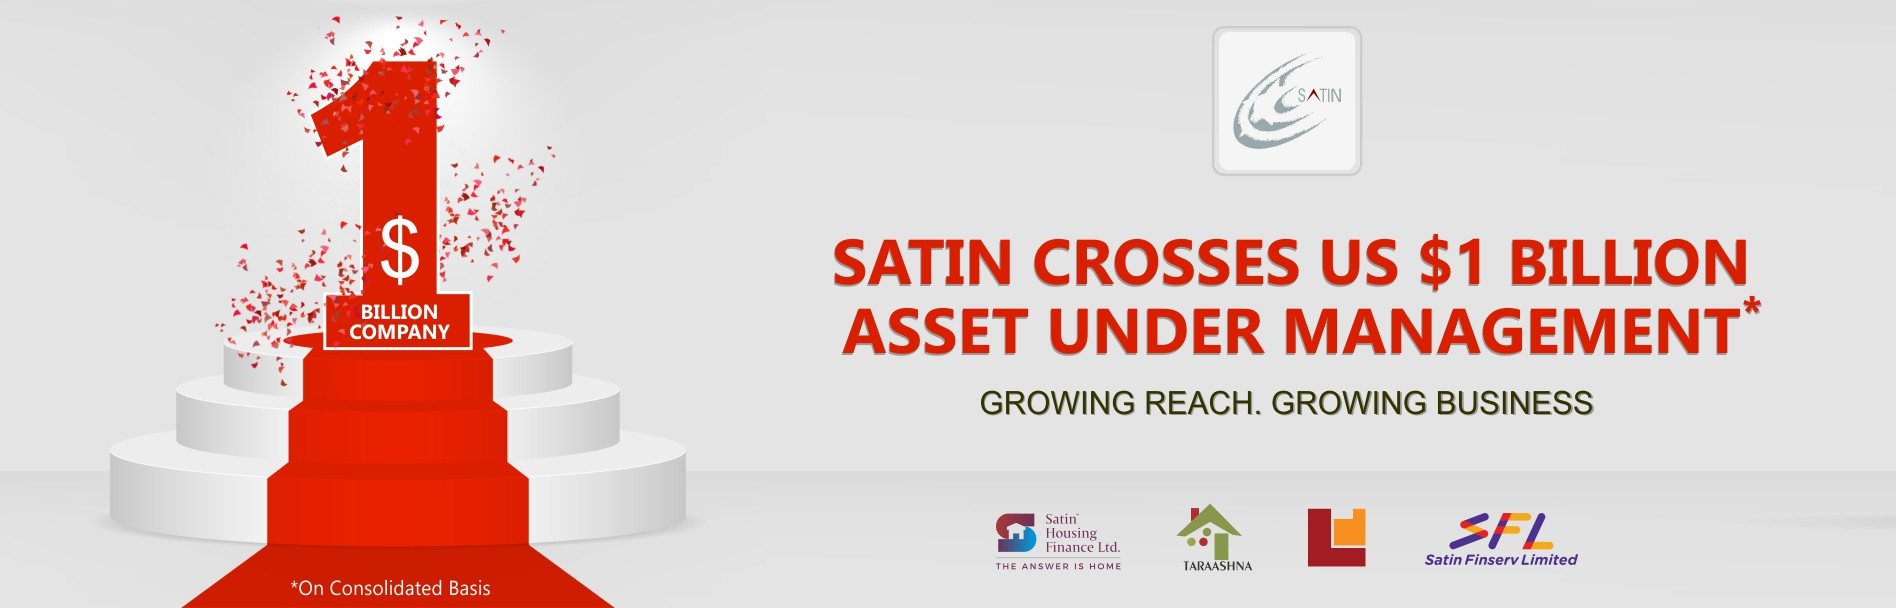 Satin Creditcare Network’s ‘Loan Dost’ to now offer up to Rs. 1.5 lakhs loan to Self-Employed decoding=